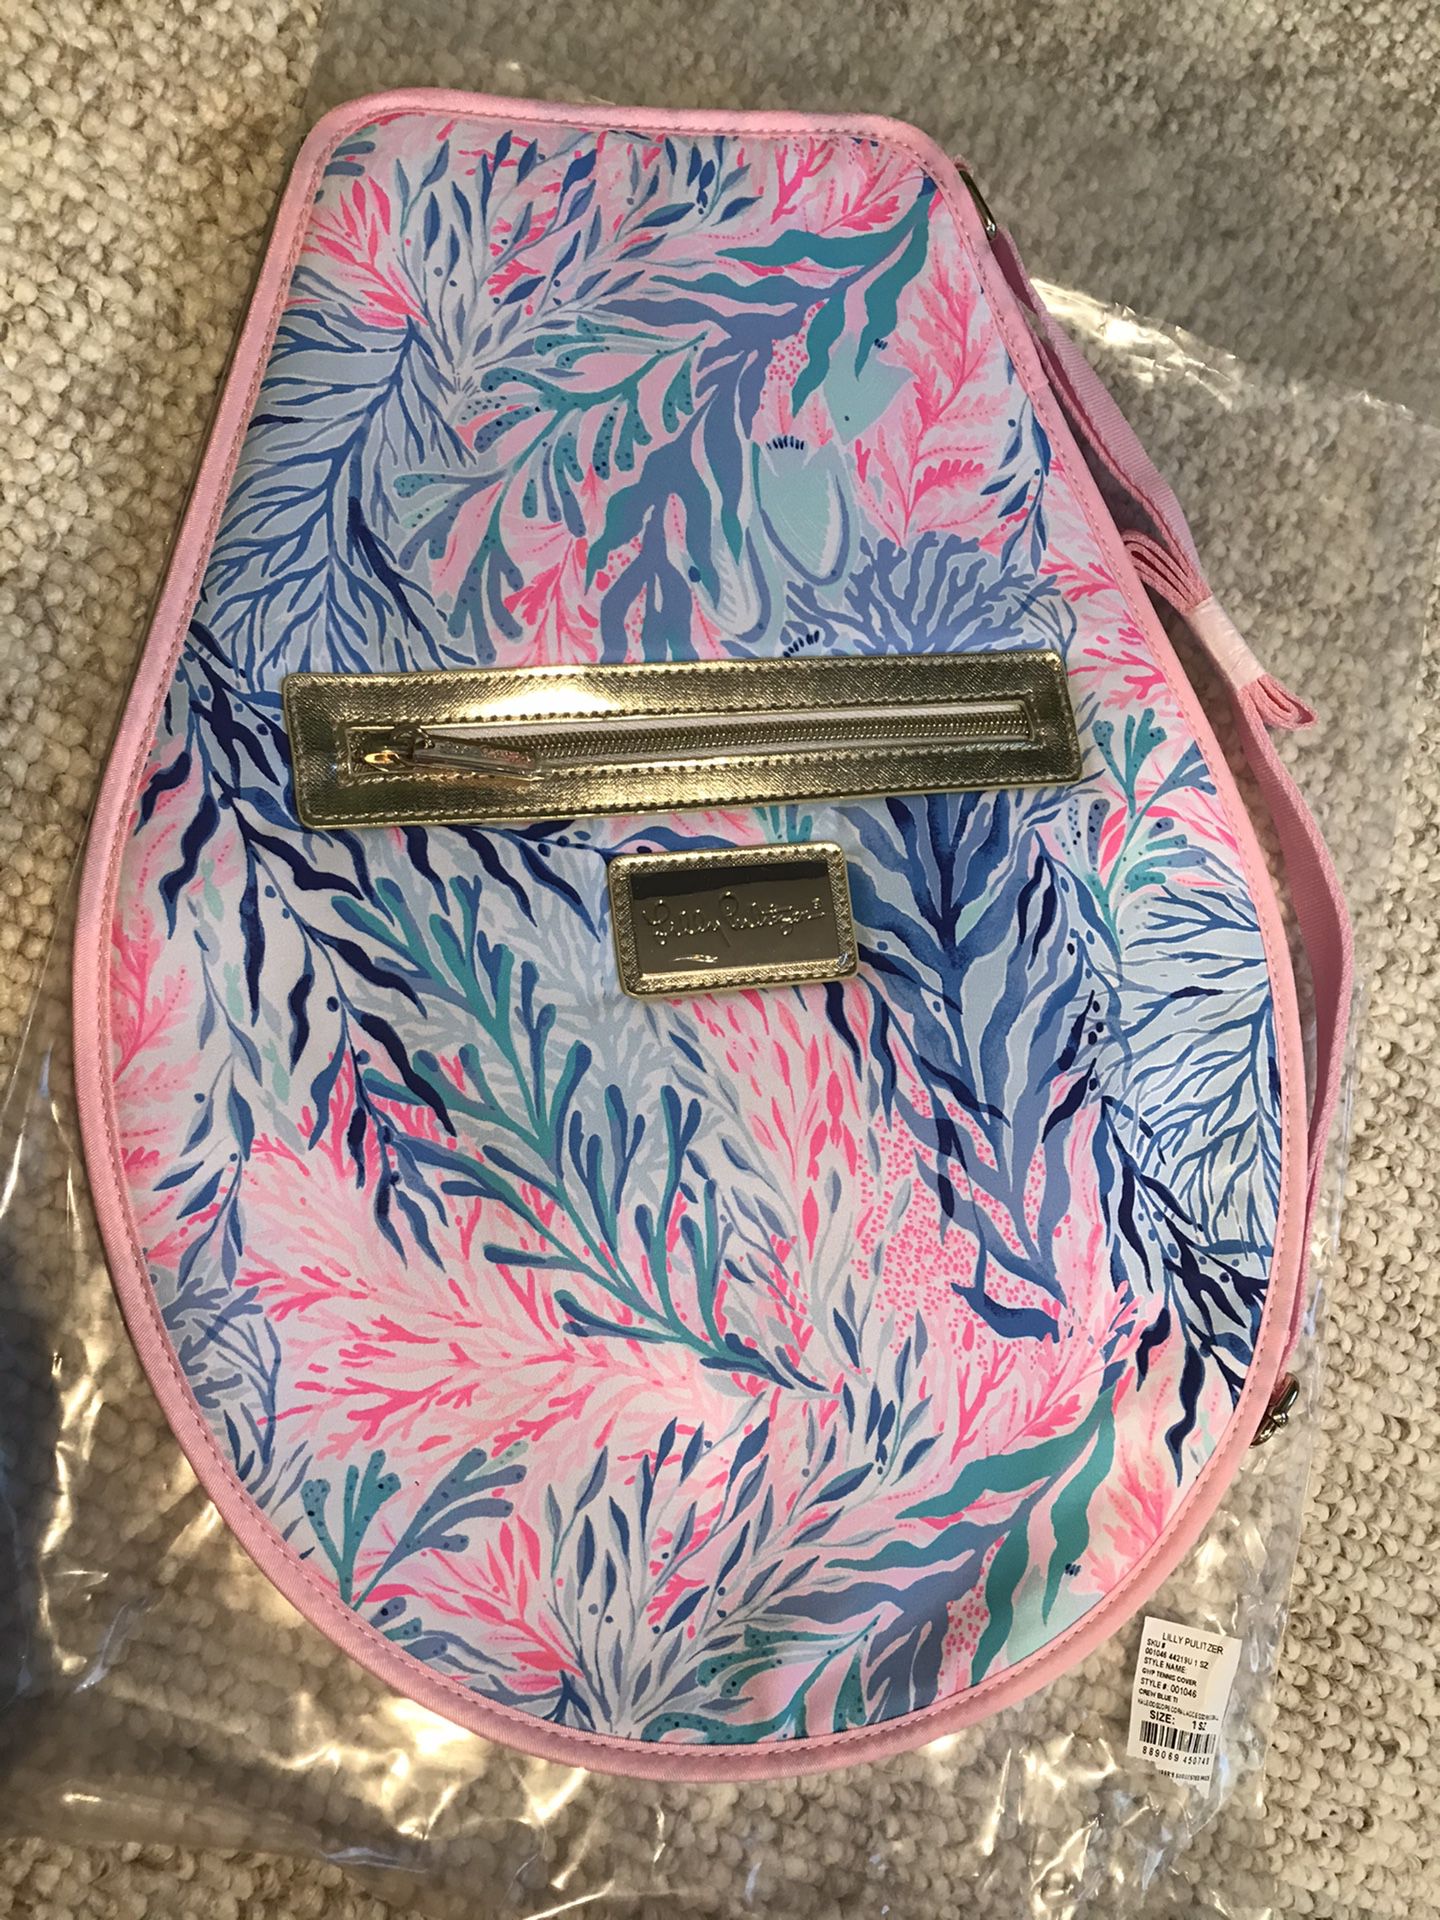 Lilly Pulitzer Tennis Racket Cover in “Crew Blue Tint Kaleidoscope Coral” Print